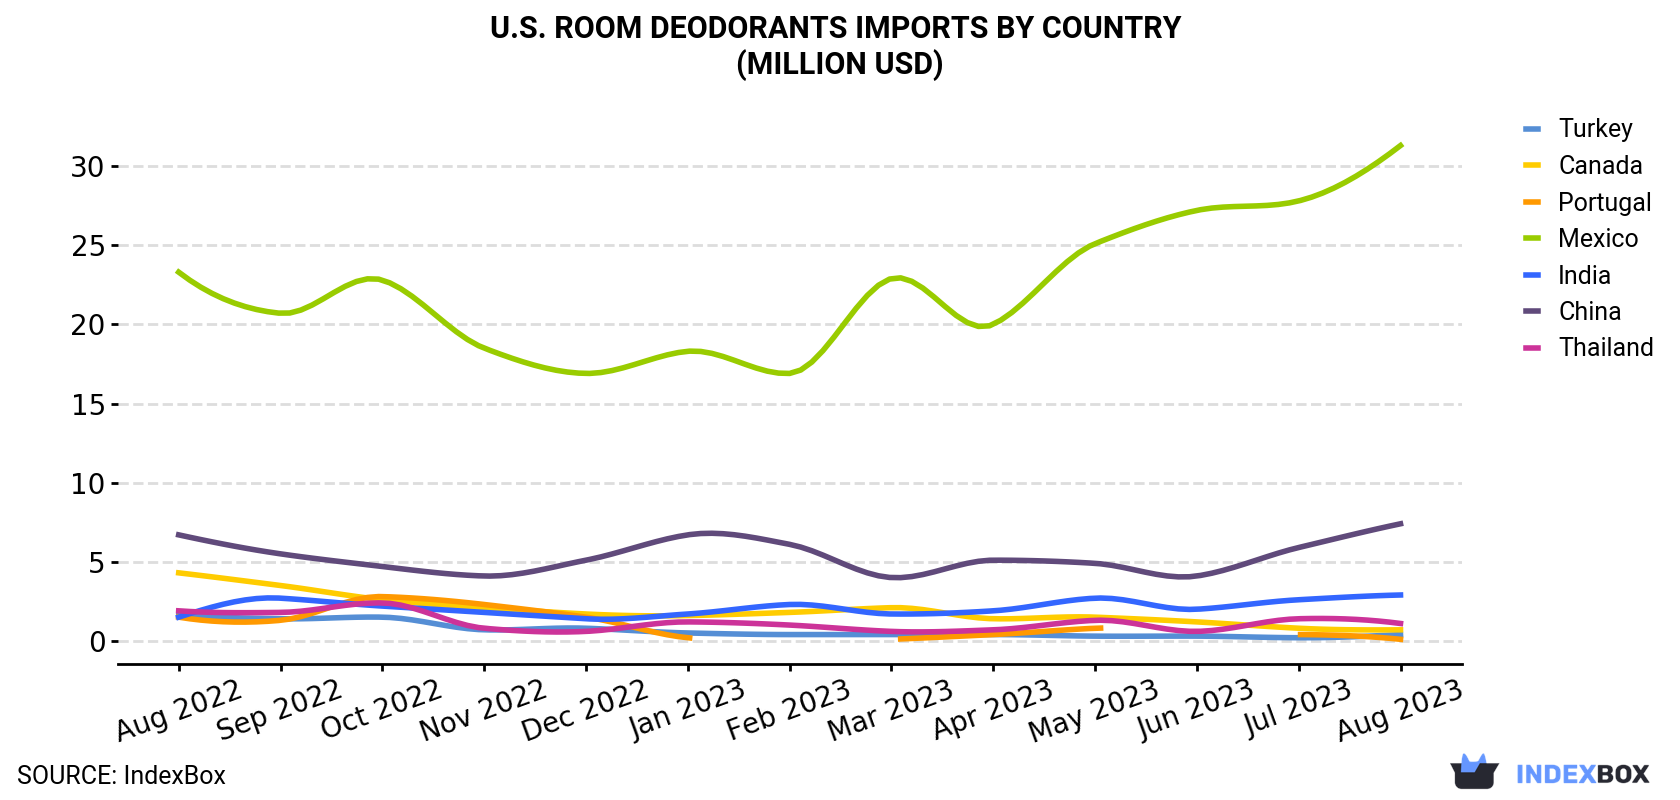 U.S. Room Deodorants Imports By Country (Million USD)